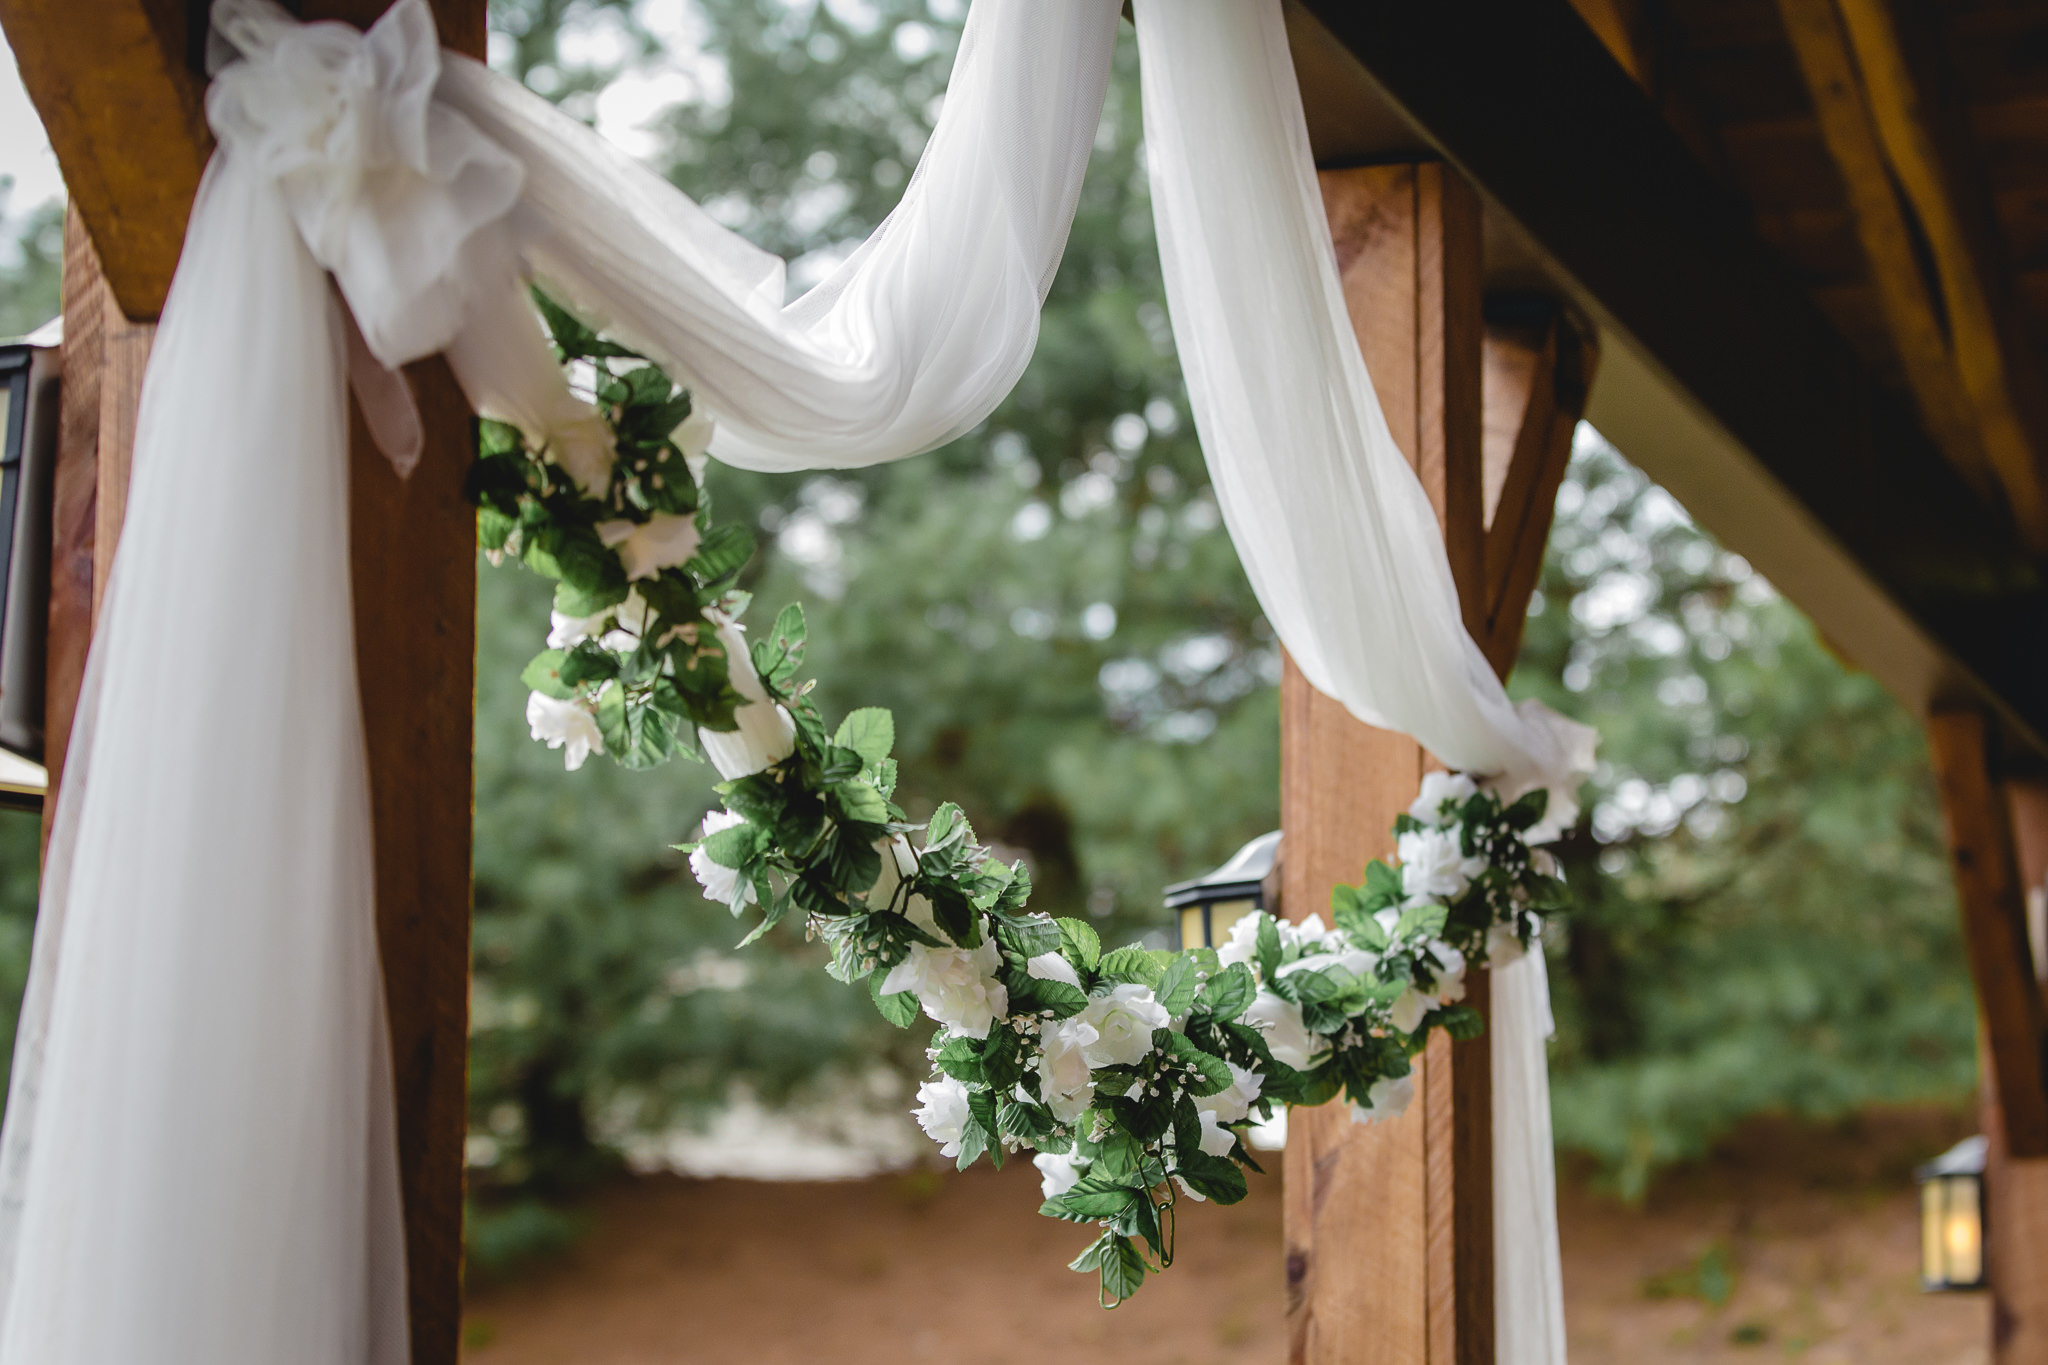 Floral decor and white drapery at a Chadwick wedding ceremony